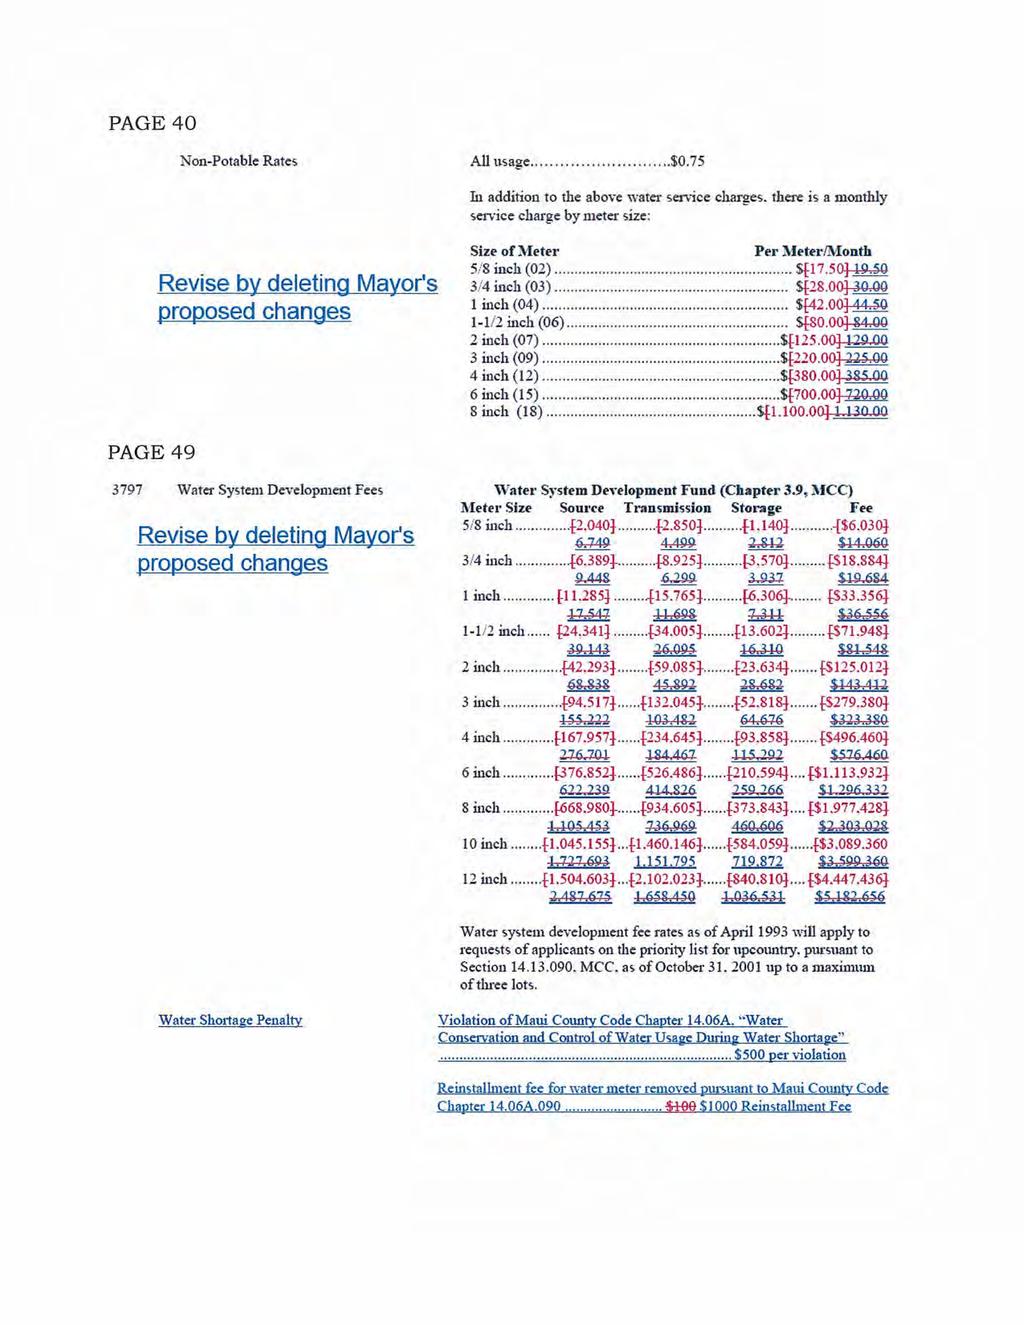 PAGE 40 Non-Potable Rates All usage $0.75 In addition to the above water service charges.